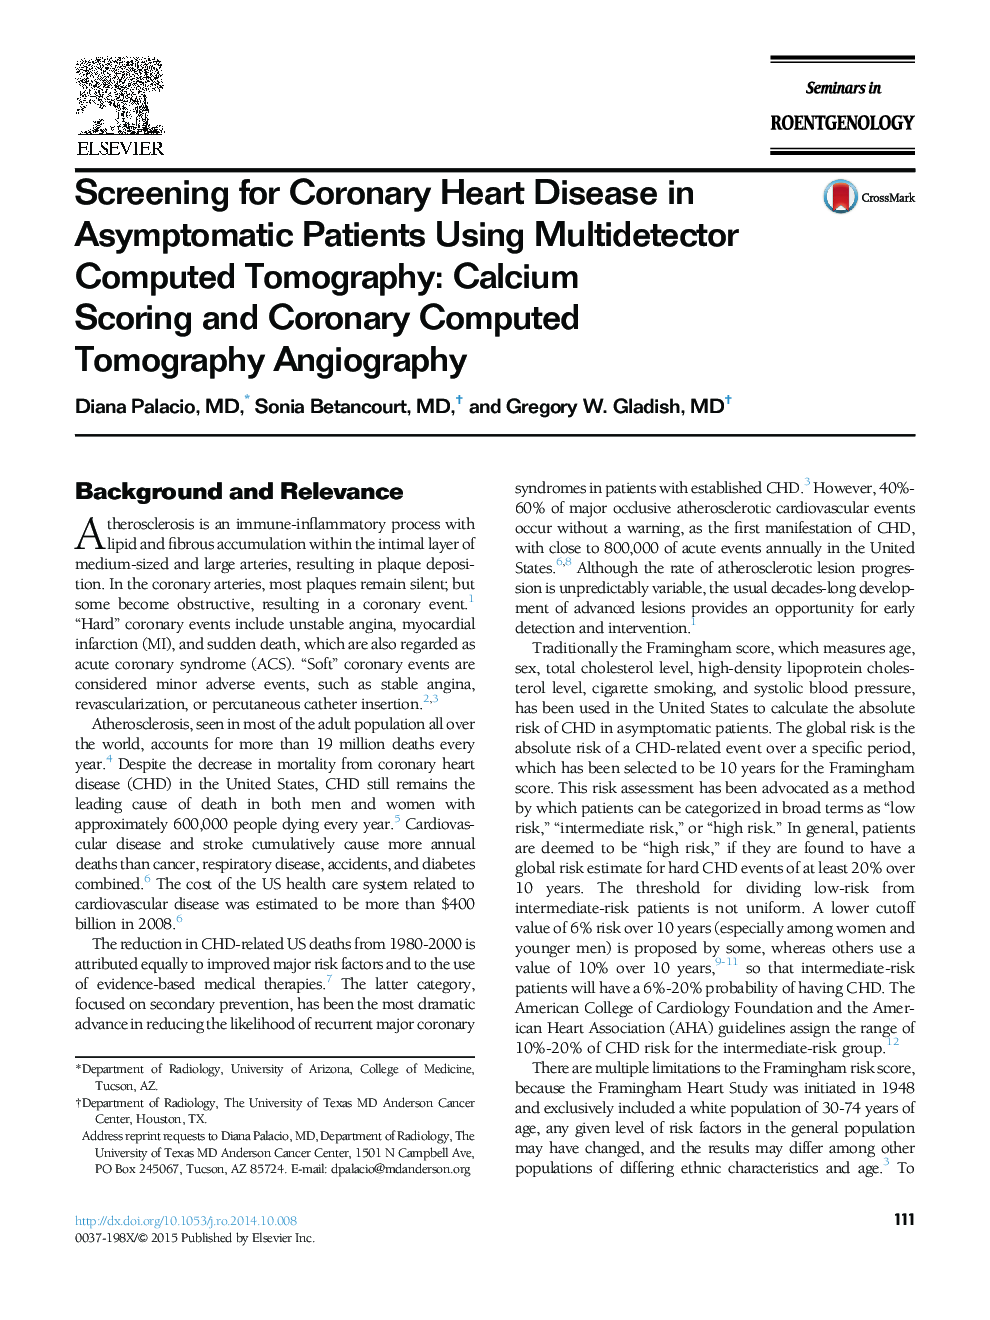 Screening for Coronary Heart Disease in Asymptomatic Patients Using Multidetector Computed Tomography: Calcium Scoring and Coronary Computed Tomography Angiography